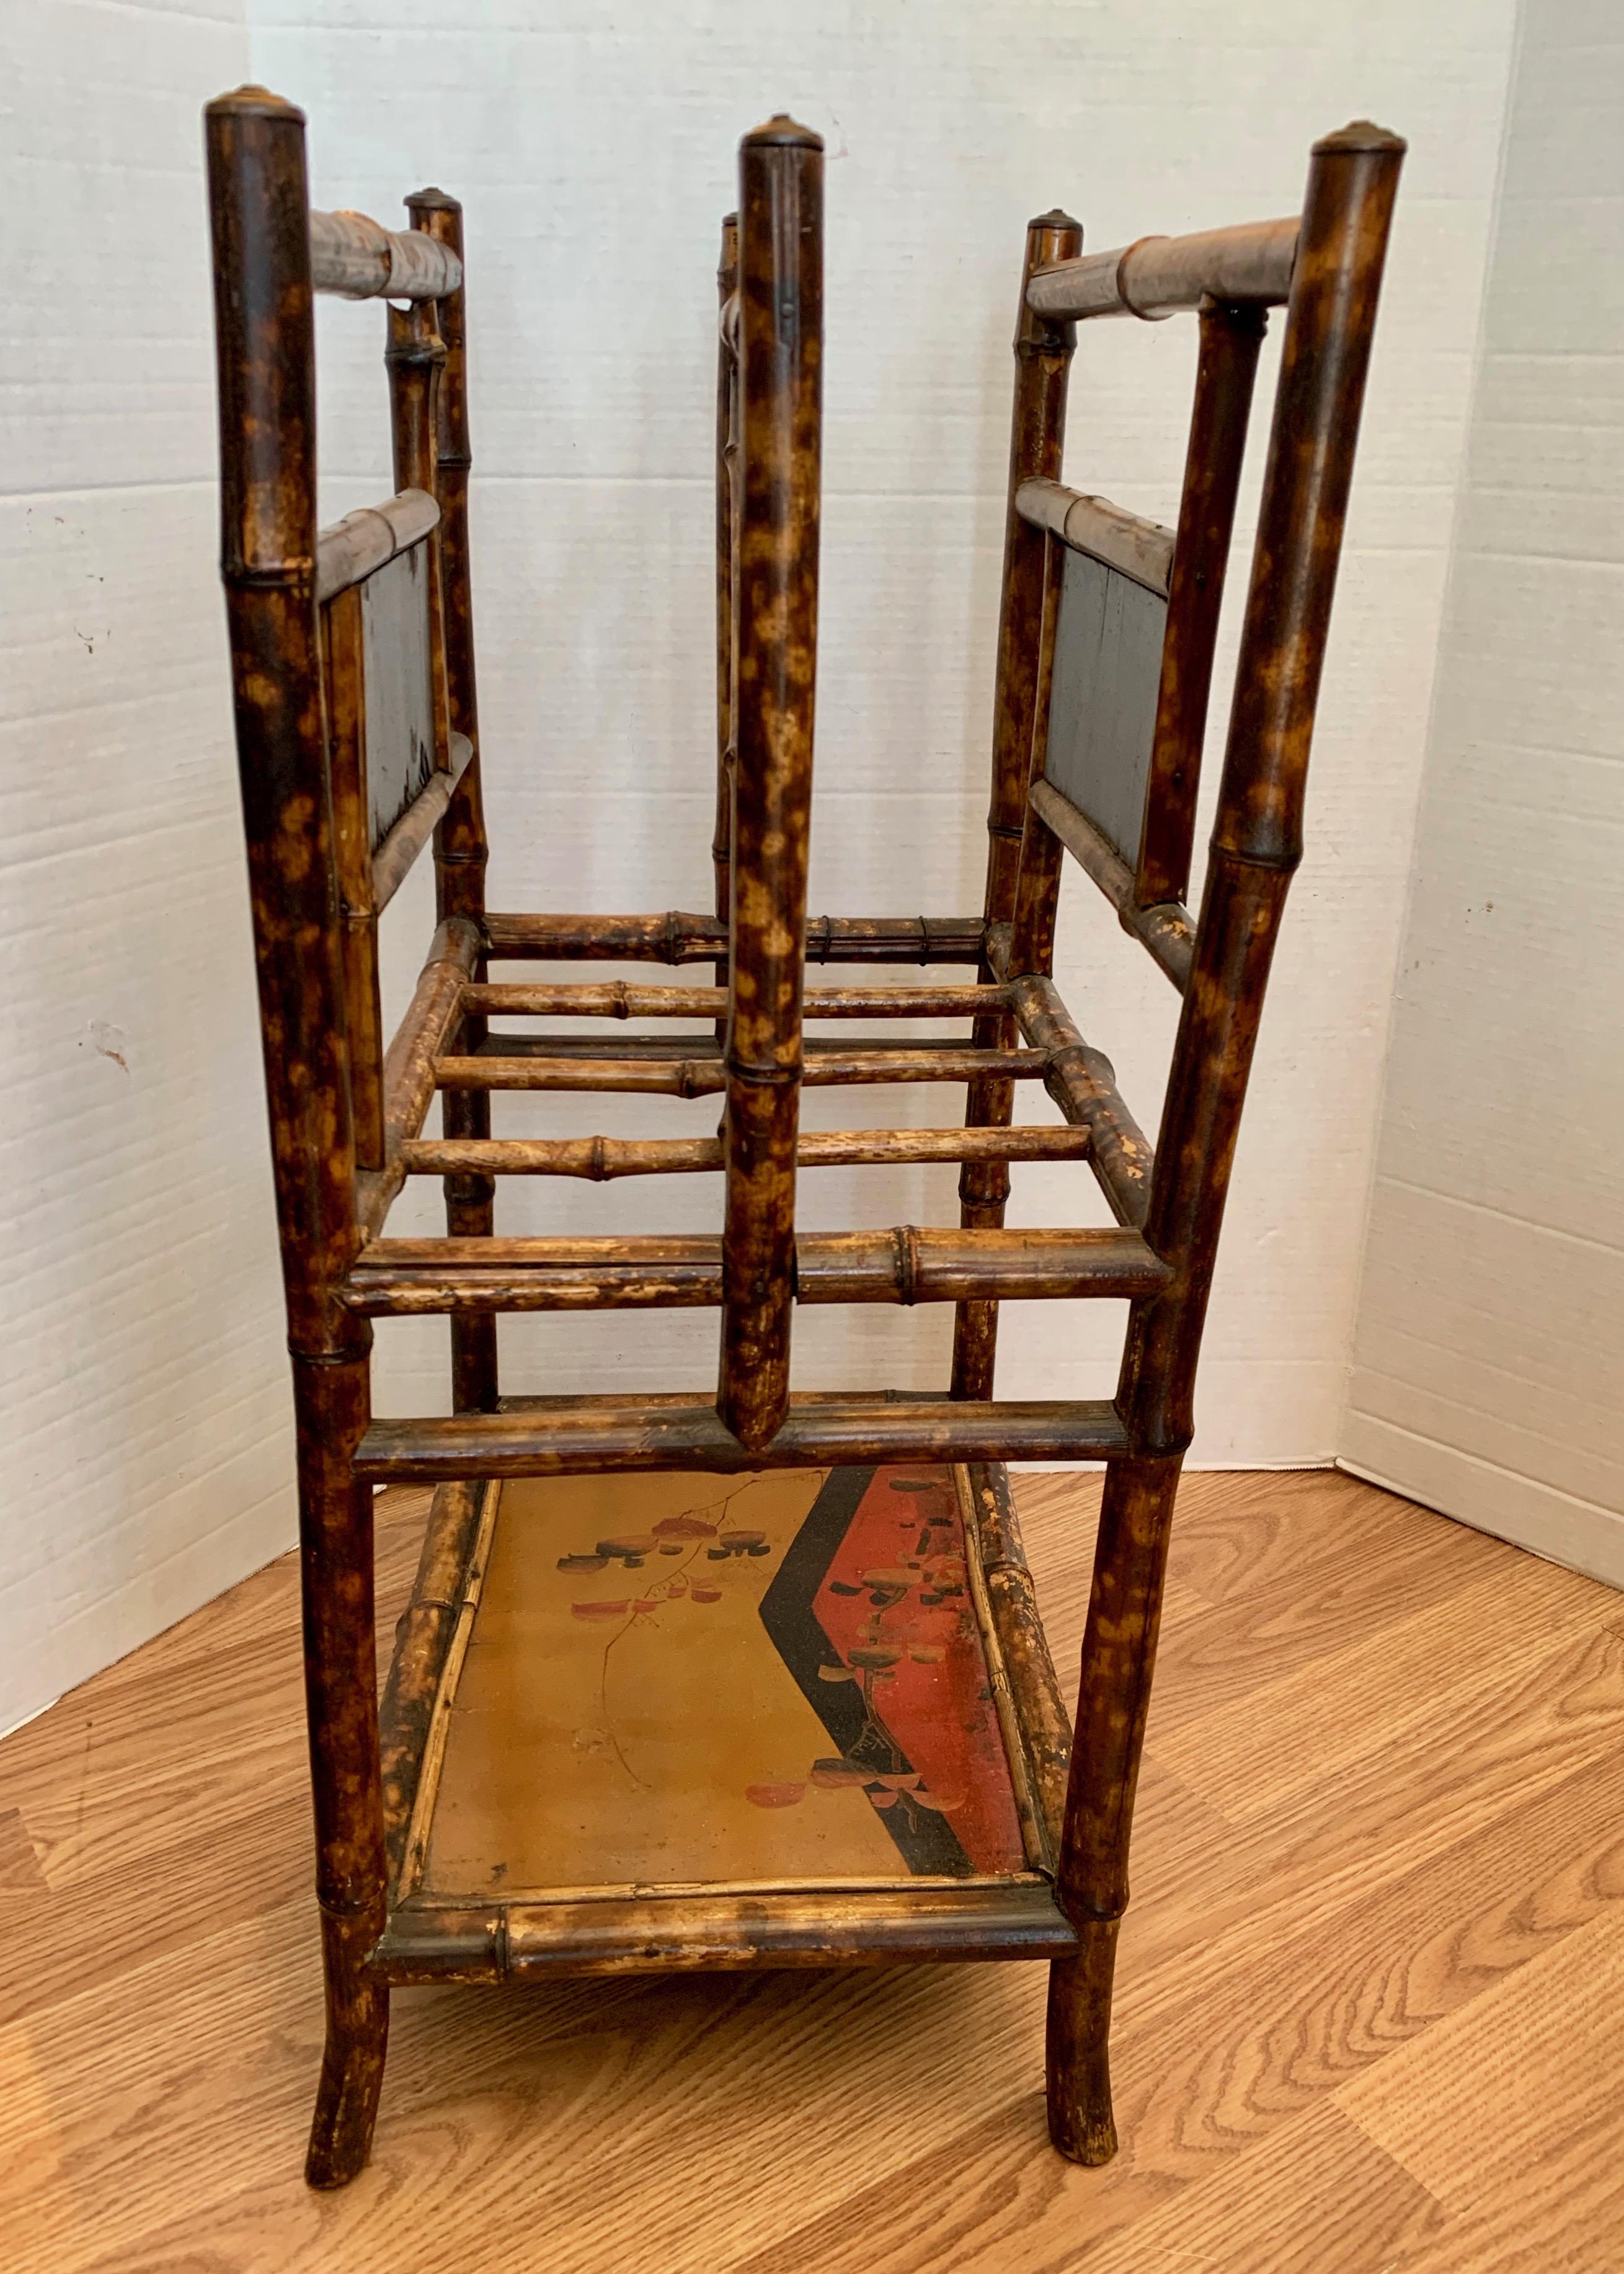  19th Century Chinoiserie English Bamboo Magazine Stand For Sale 3